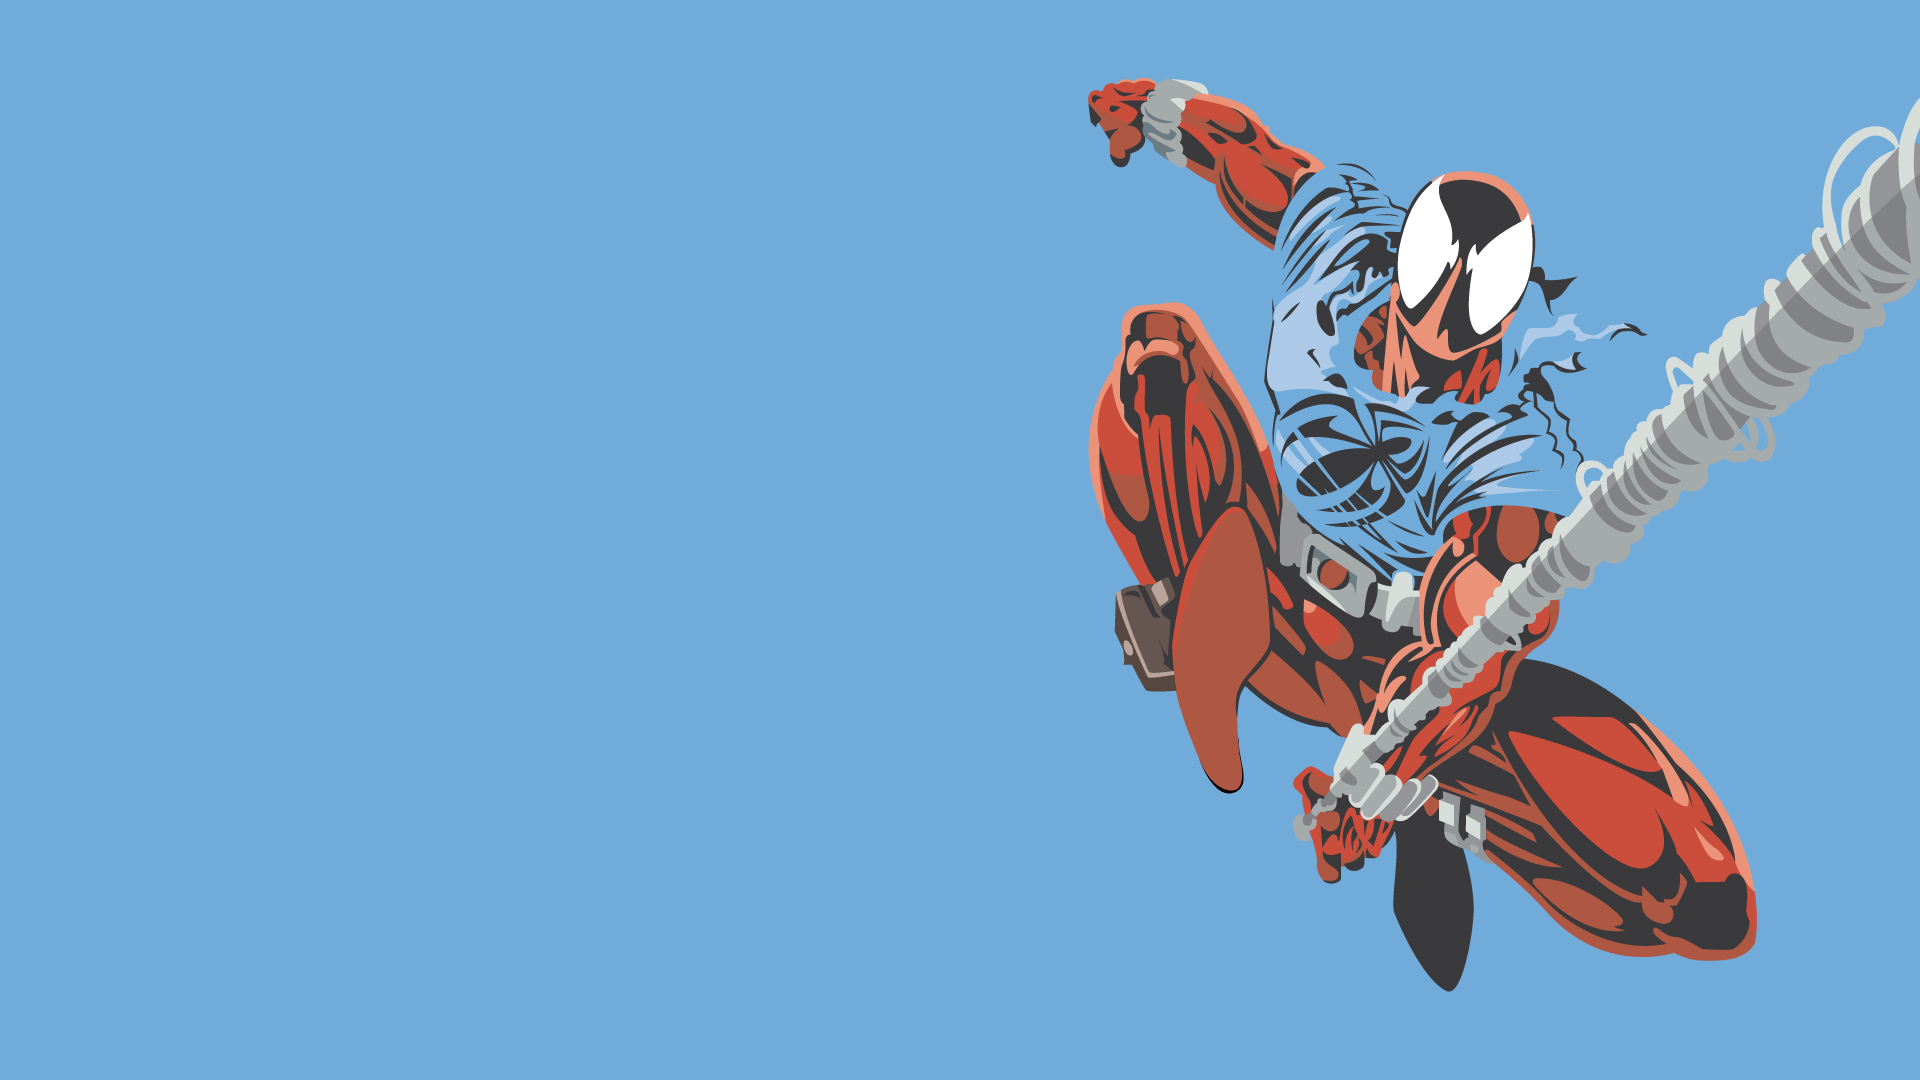 Scarlet Spider Logo - Got Some Love From My Other Spider Man Wallpaper, And Was Requested